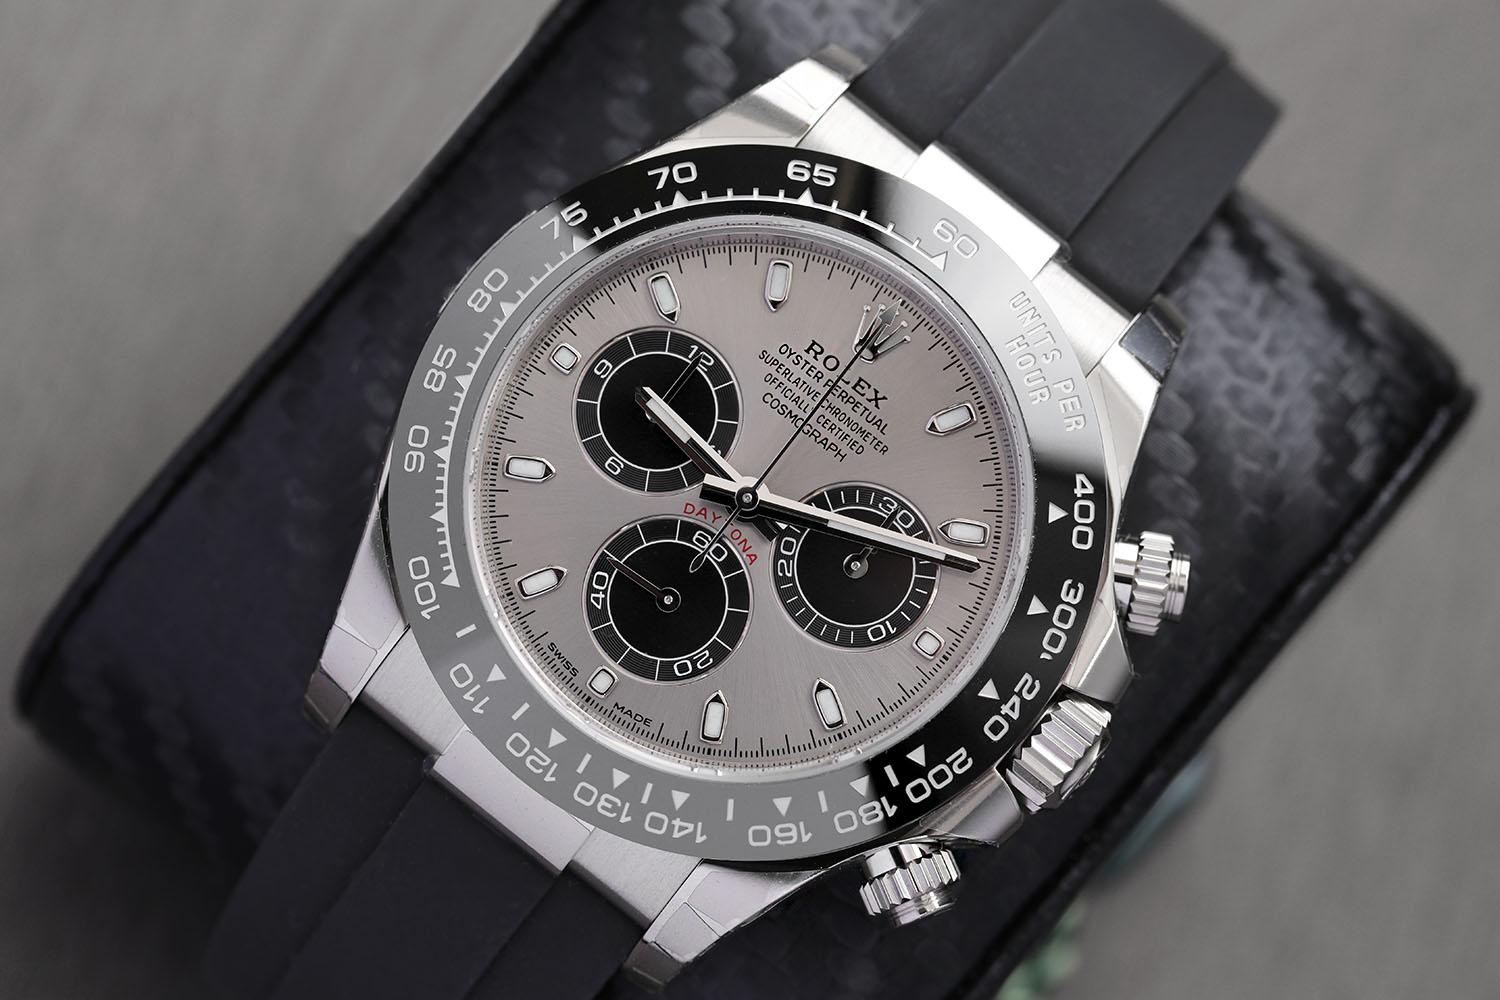 FACTORY STICKERS. 18kt white gold case with a black oysterflex band. Black monobloc cerachrom ceramic bezel. Silver dial with silver-tone hands and luminous hour markers. Tachymeter. Black Chronograph - sub-dials displaying: three - 60 second, 30